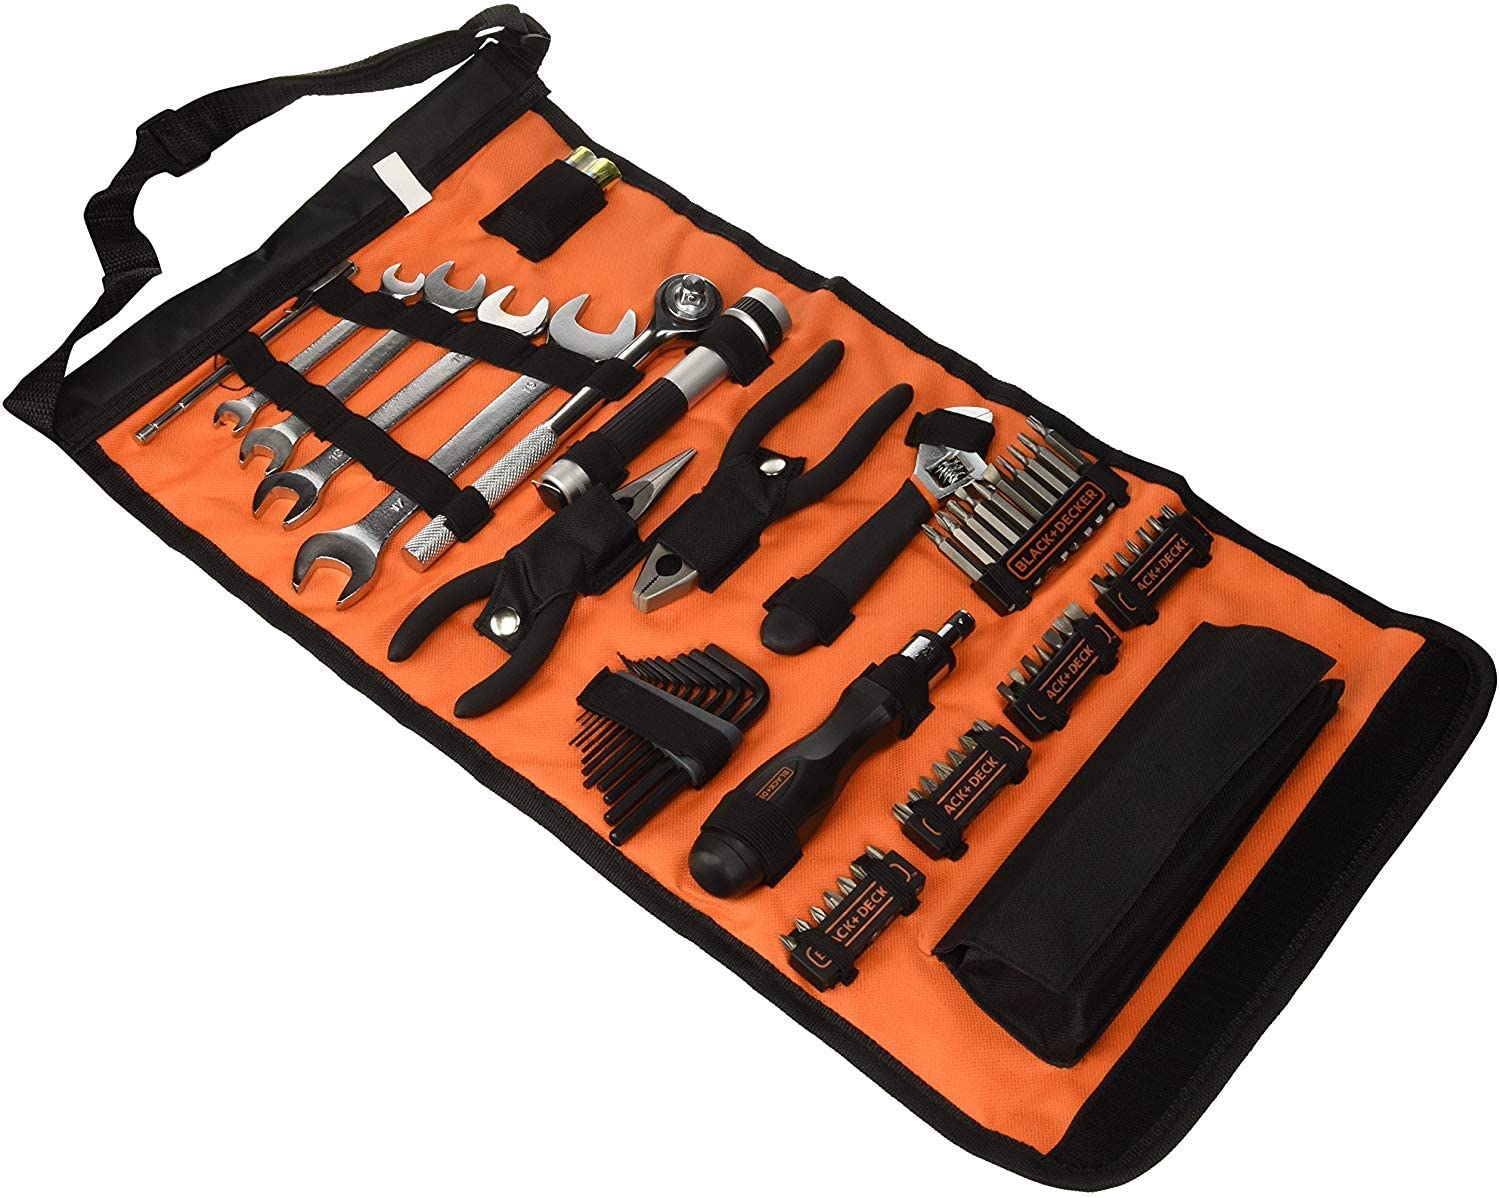 Black and Decker A7144-XJ Handy Roll-Up Tool Bag with Automobile Tools